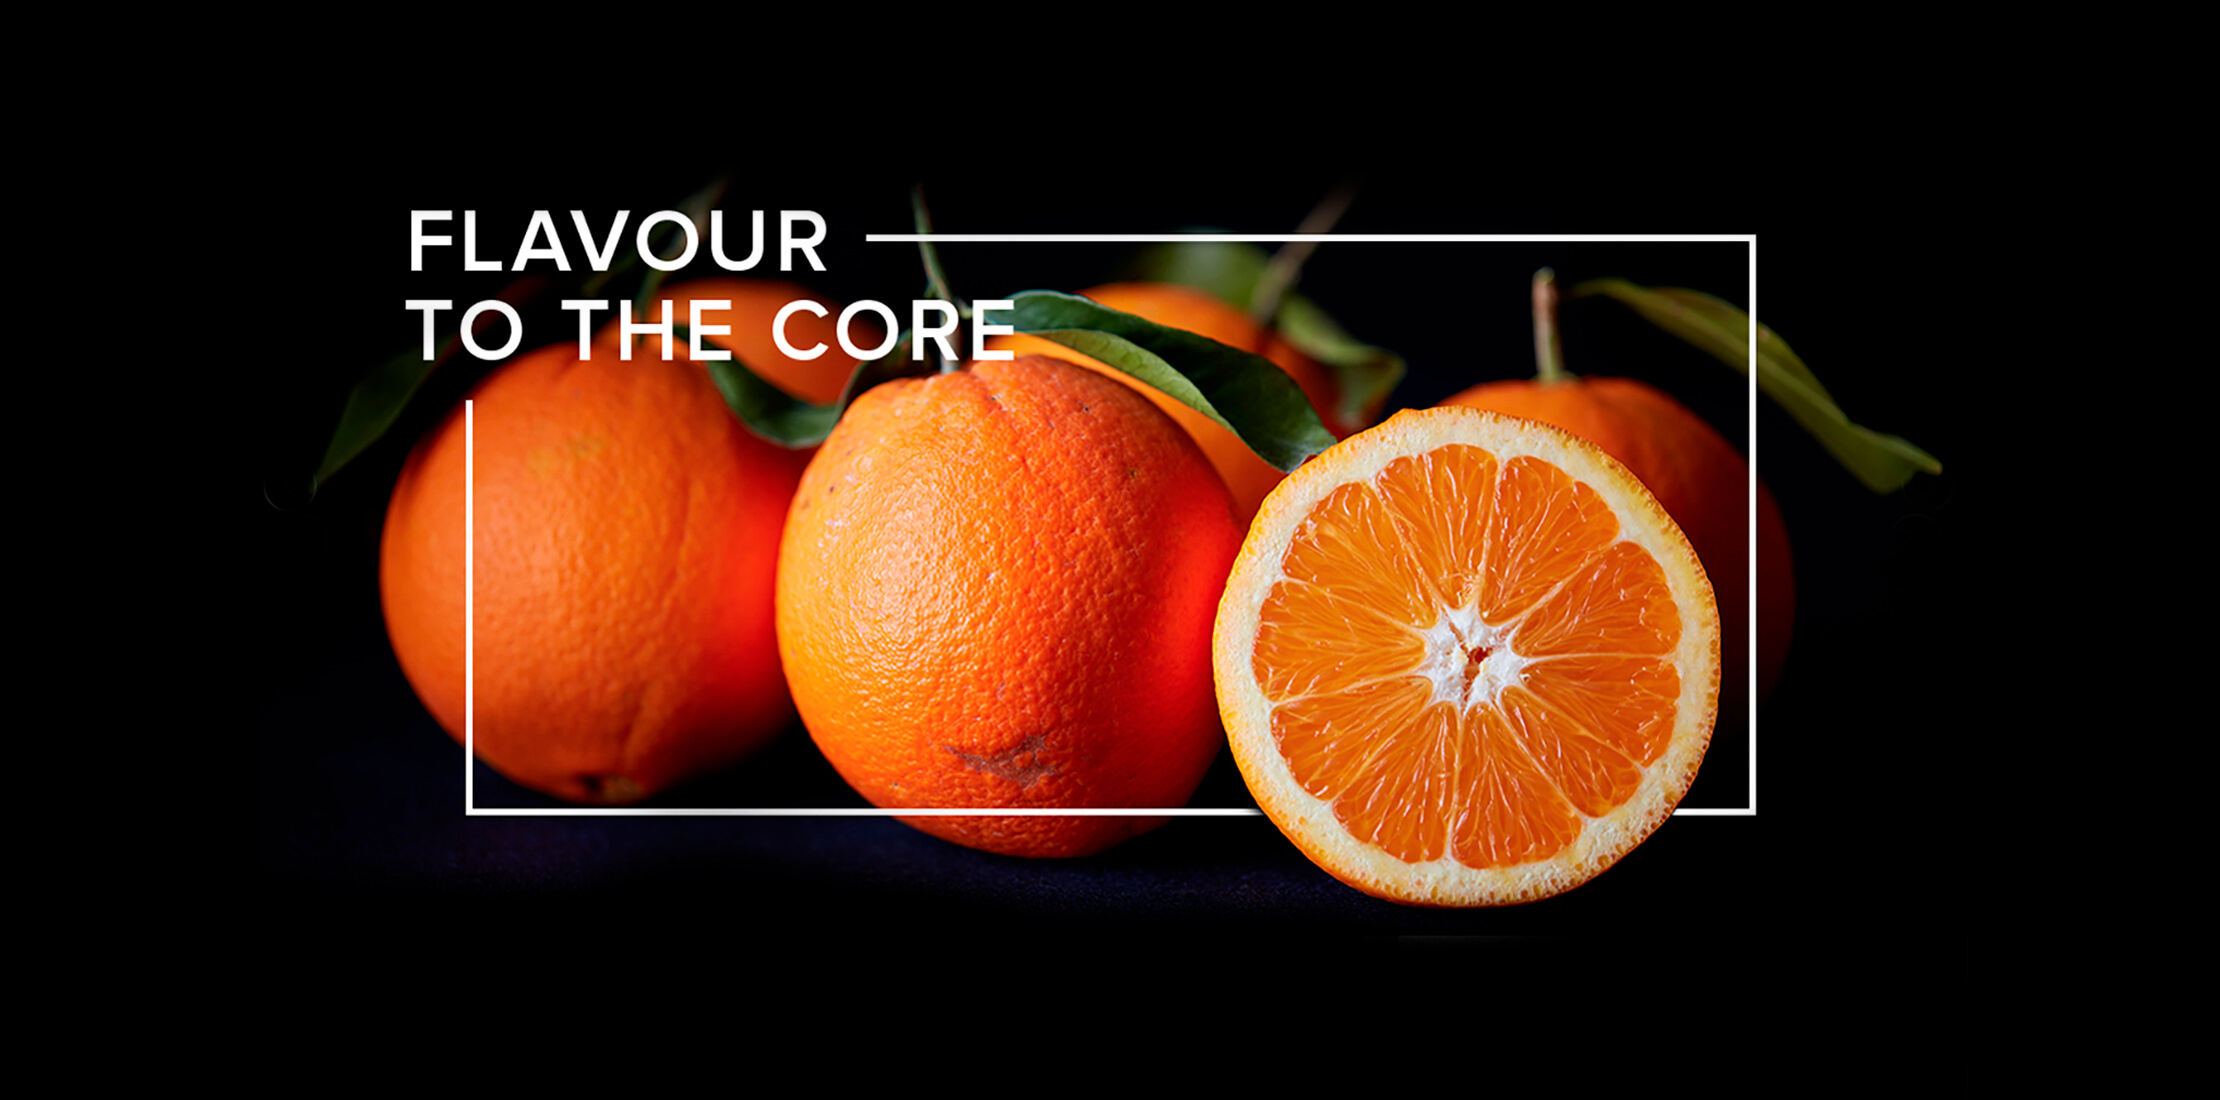 White 'Flavour to the Core' heading and rectangular frame on a black background, intertwined with oranges